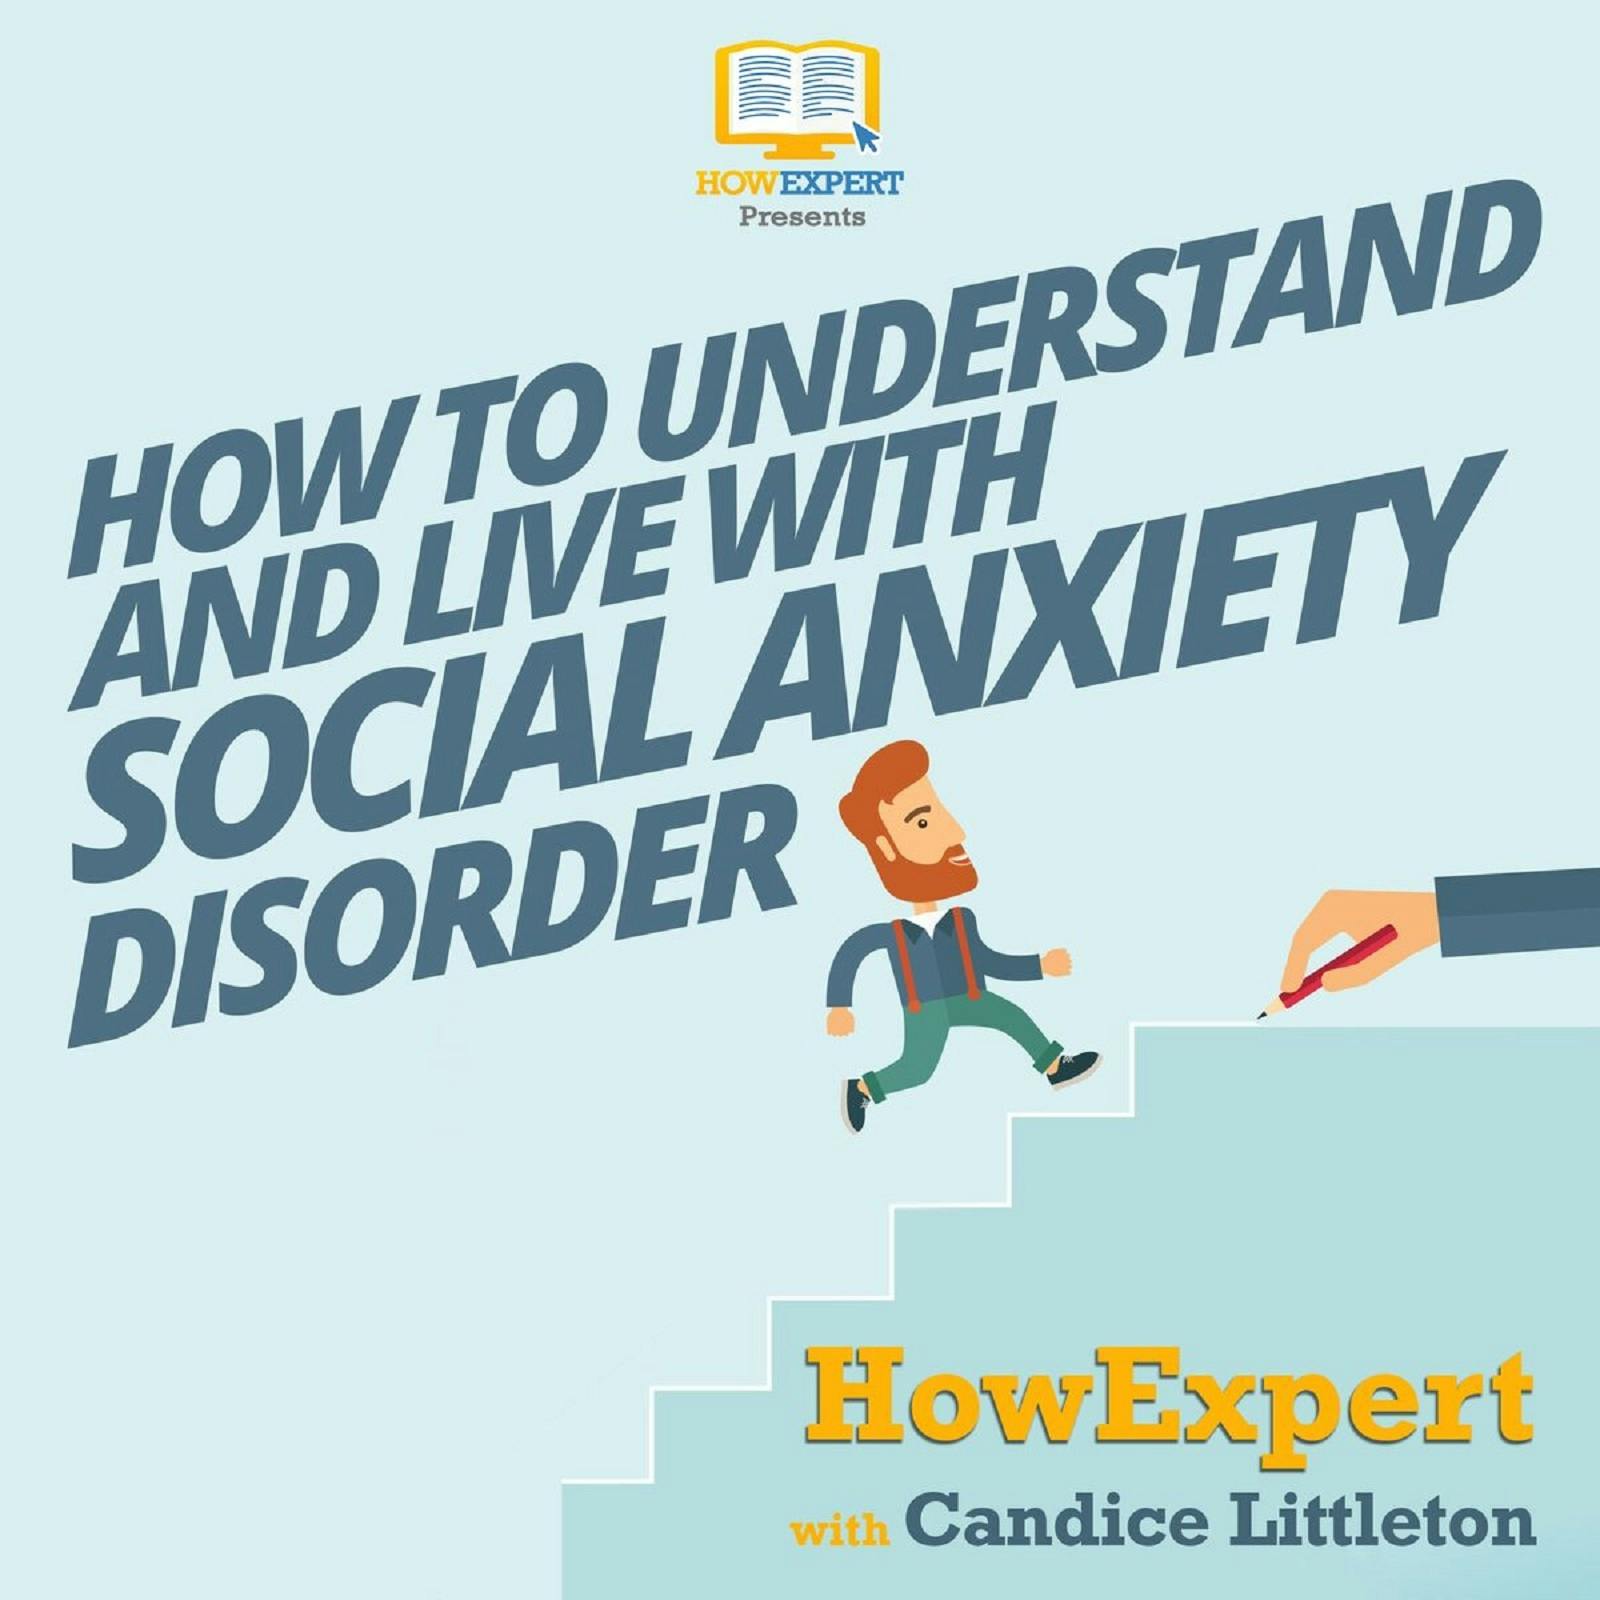 How To Understand and Live With Social Anxiety Disorder - undefined